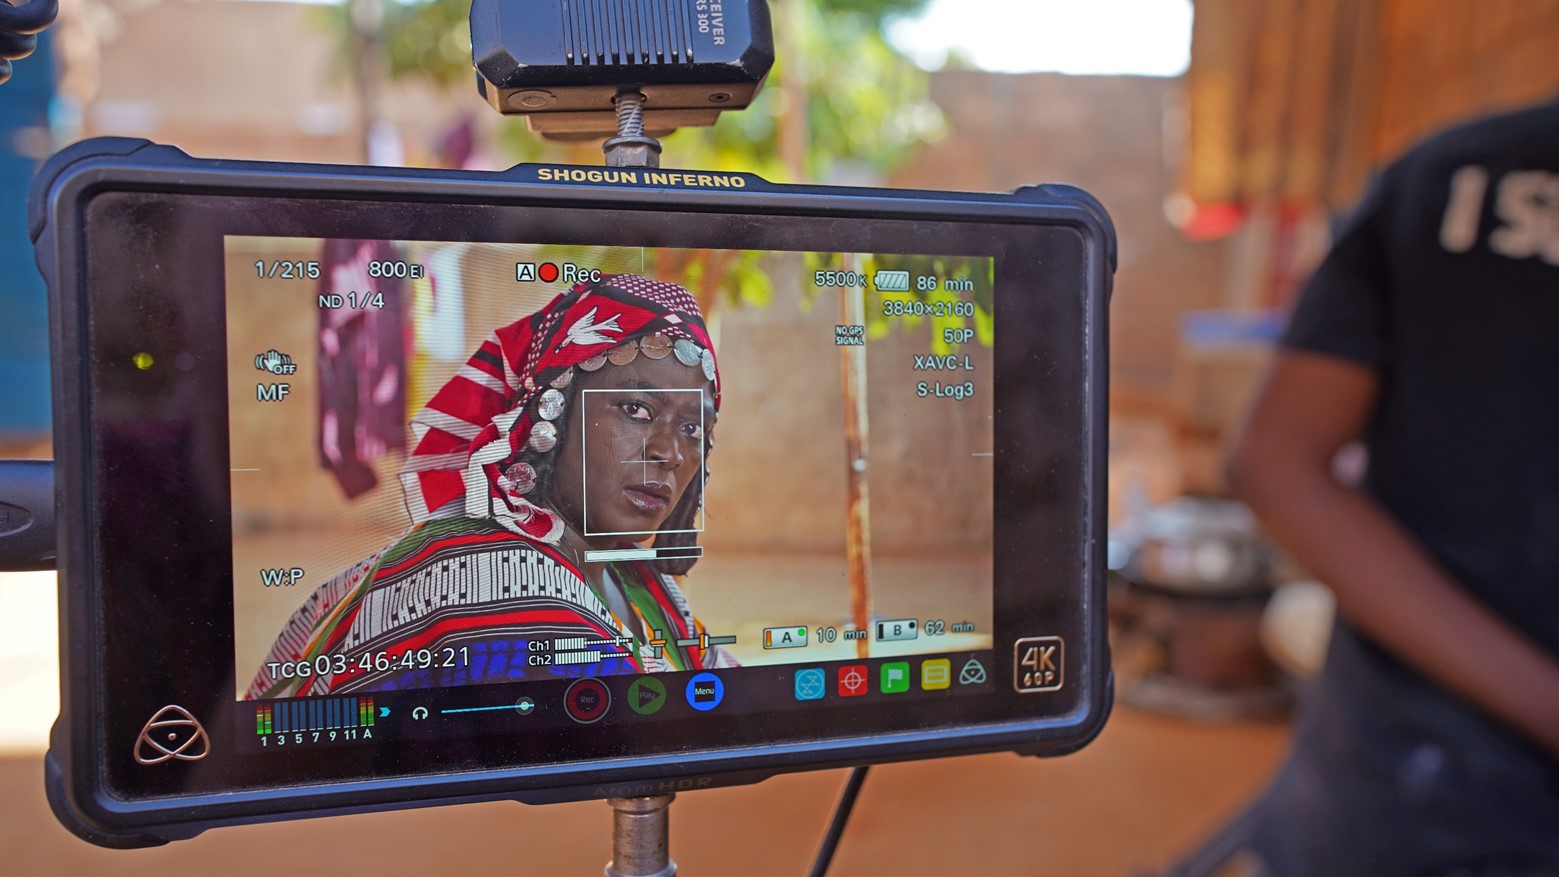 Shooting of the video spot "Go for it" in Niger, Niamey, September 2021, as part of the #WhyNotMe campaign